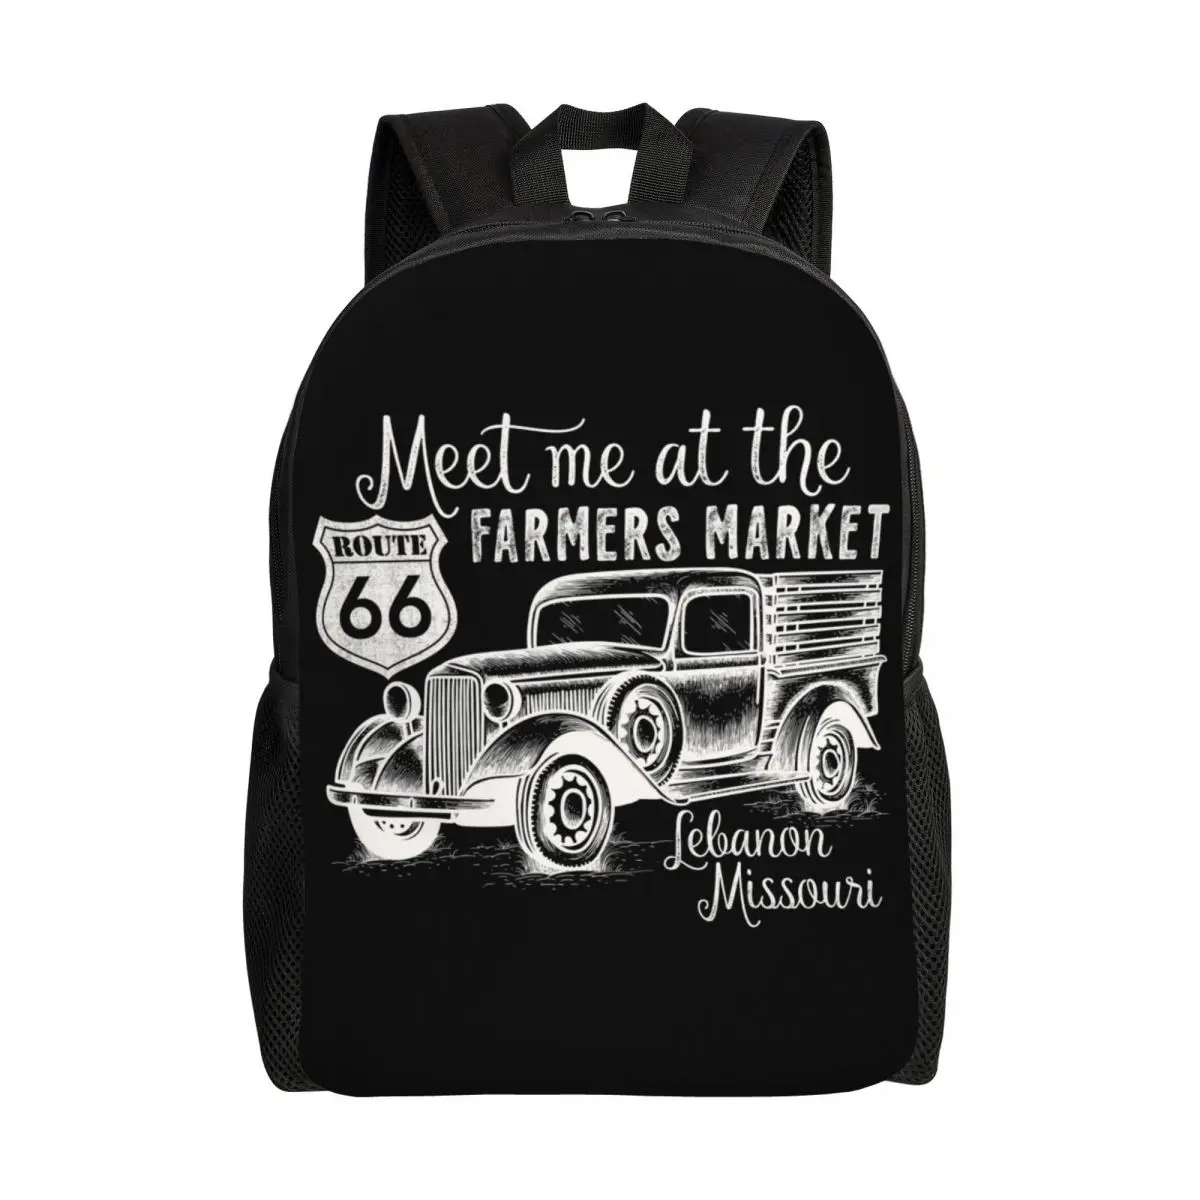 

Meet Me At The Route 66 Farmers Market Retro Vintage Produce Truck Backpack Bookbag for College School Street of America Bag